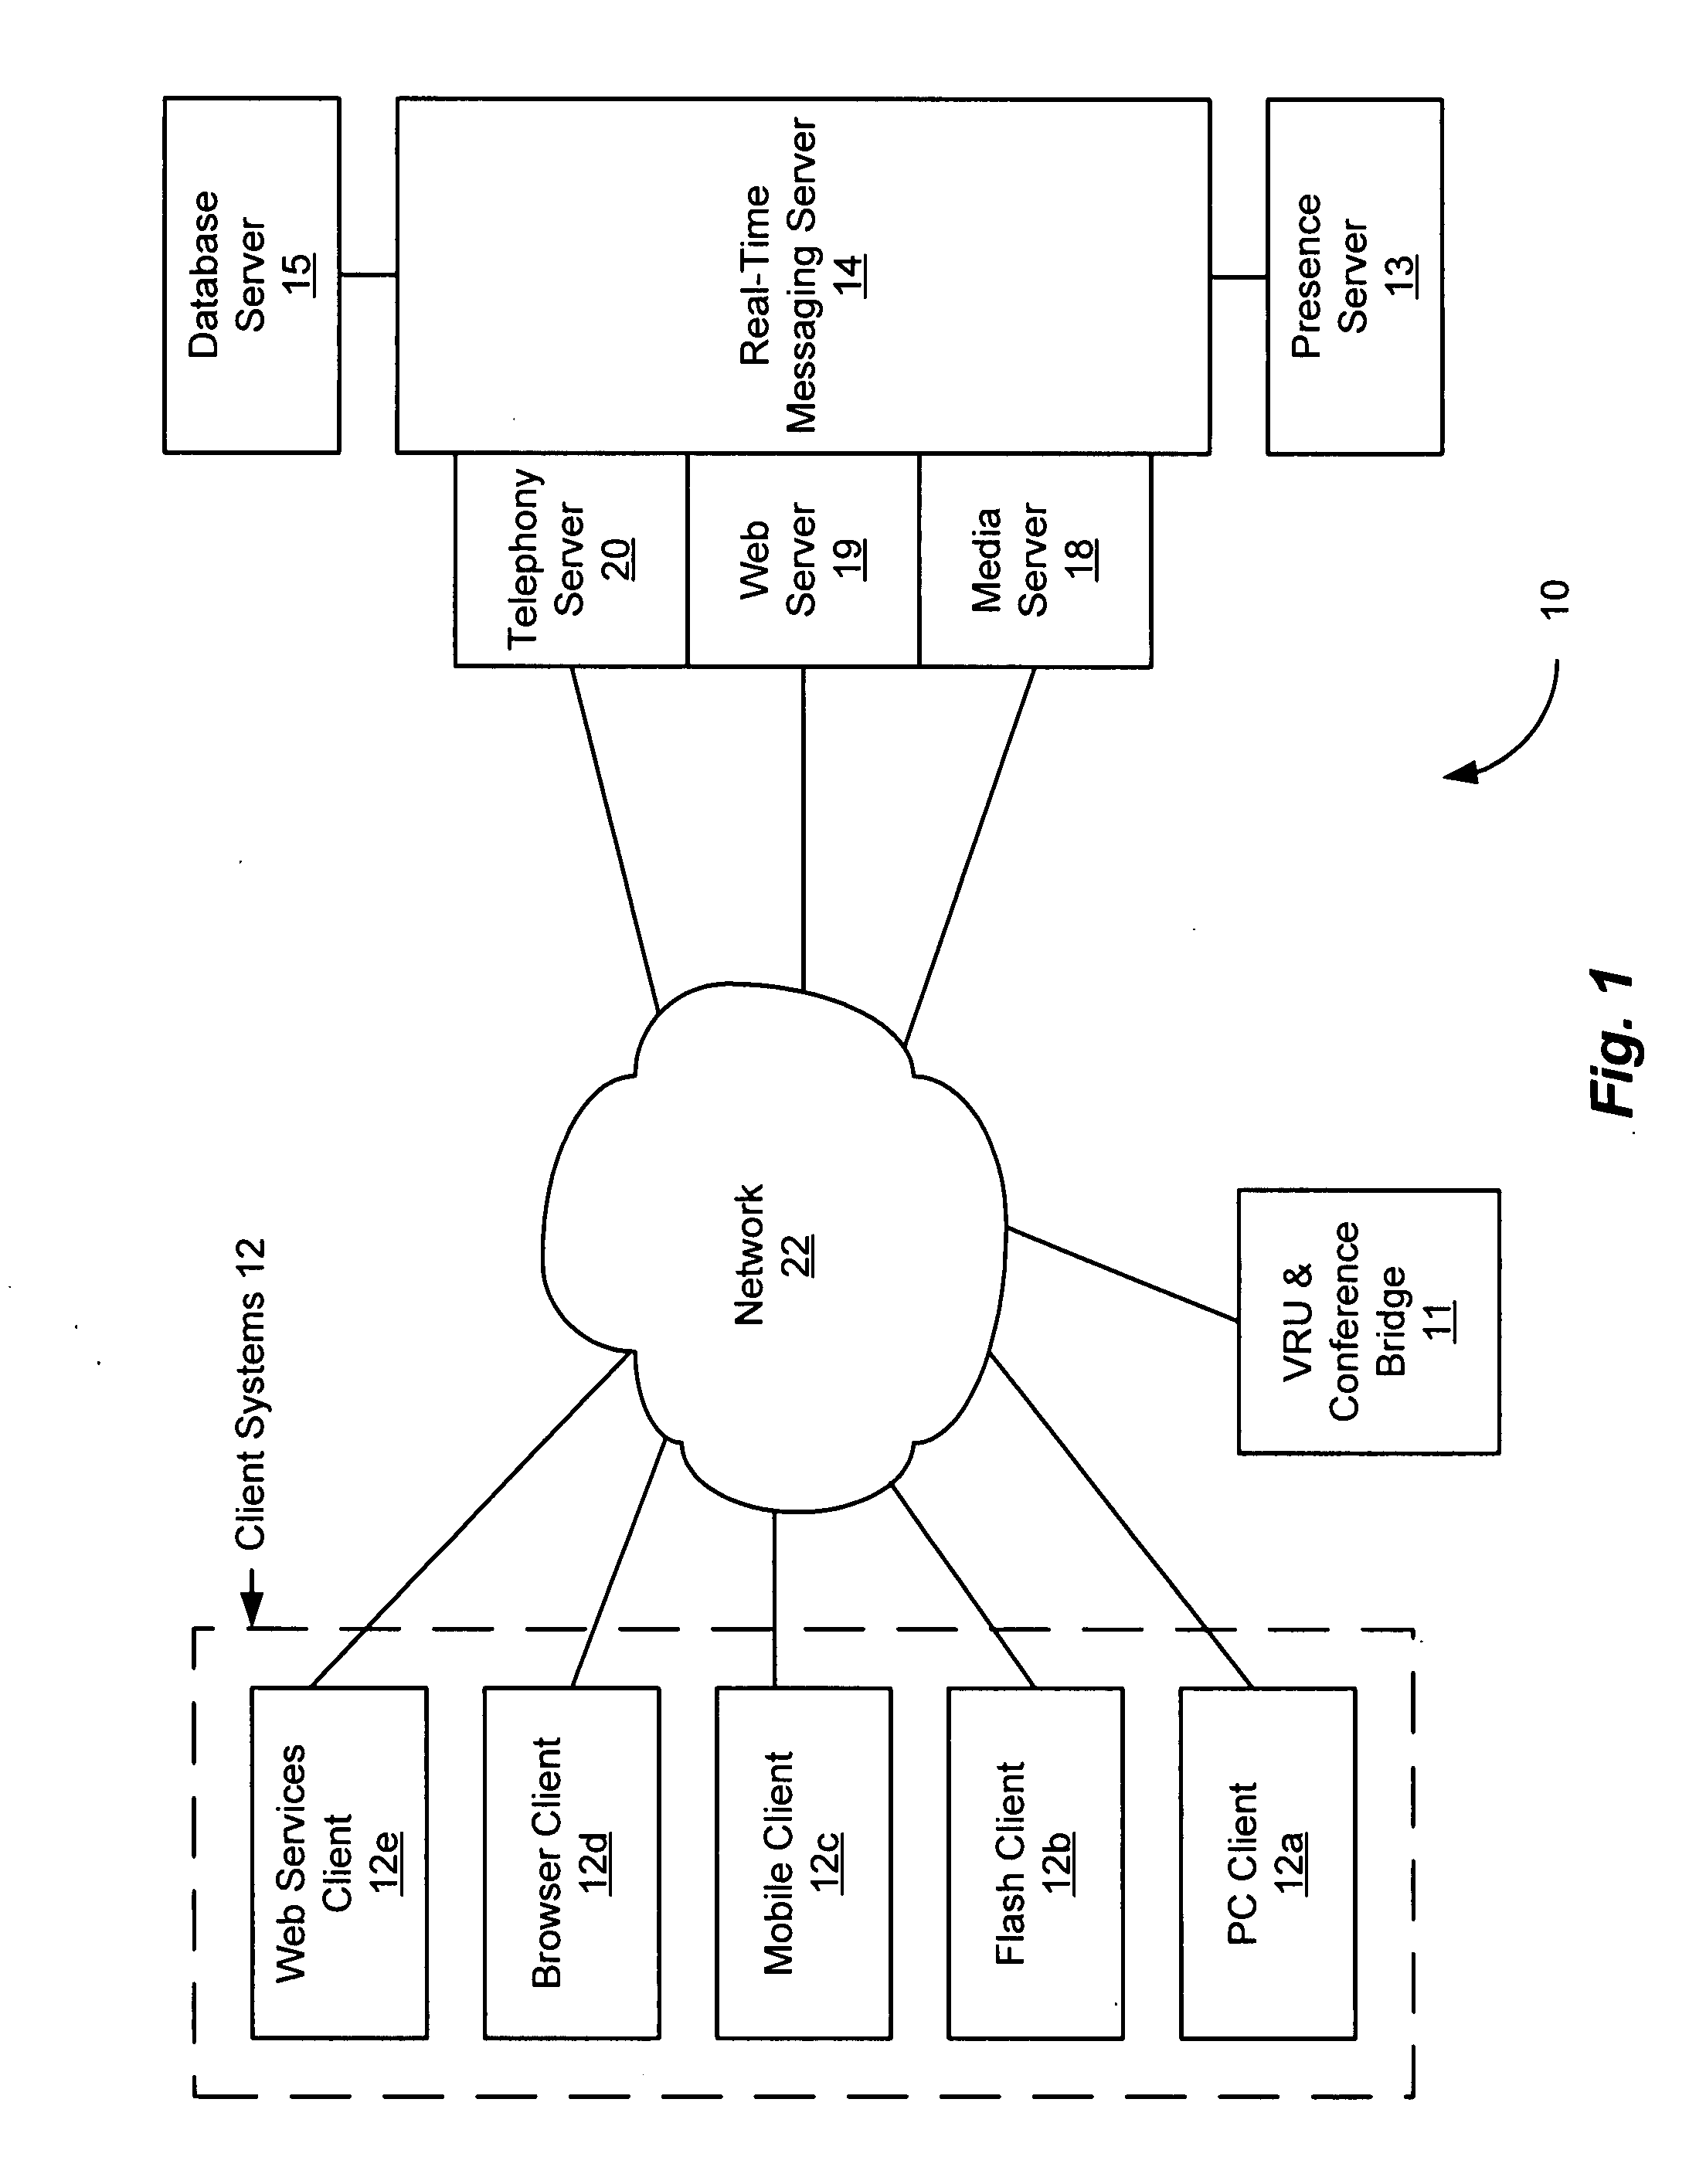 Web-based system and method of establishing an on-line meeting or teleconference